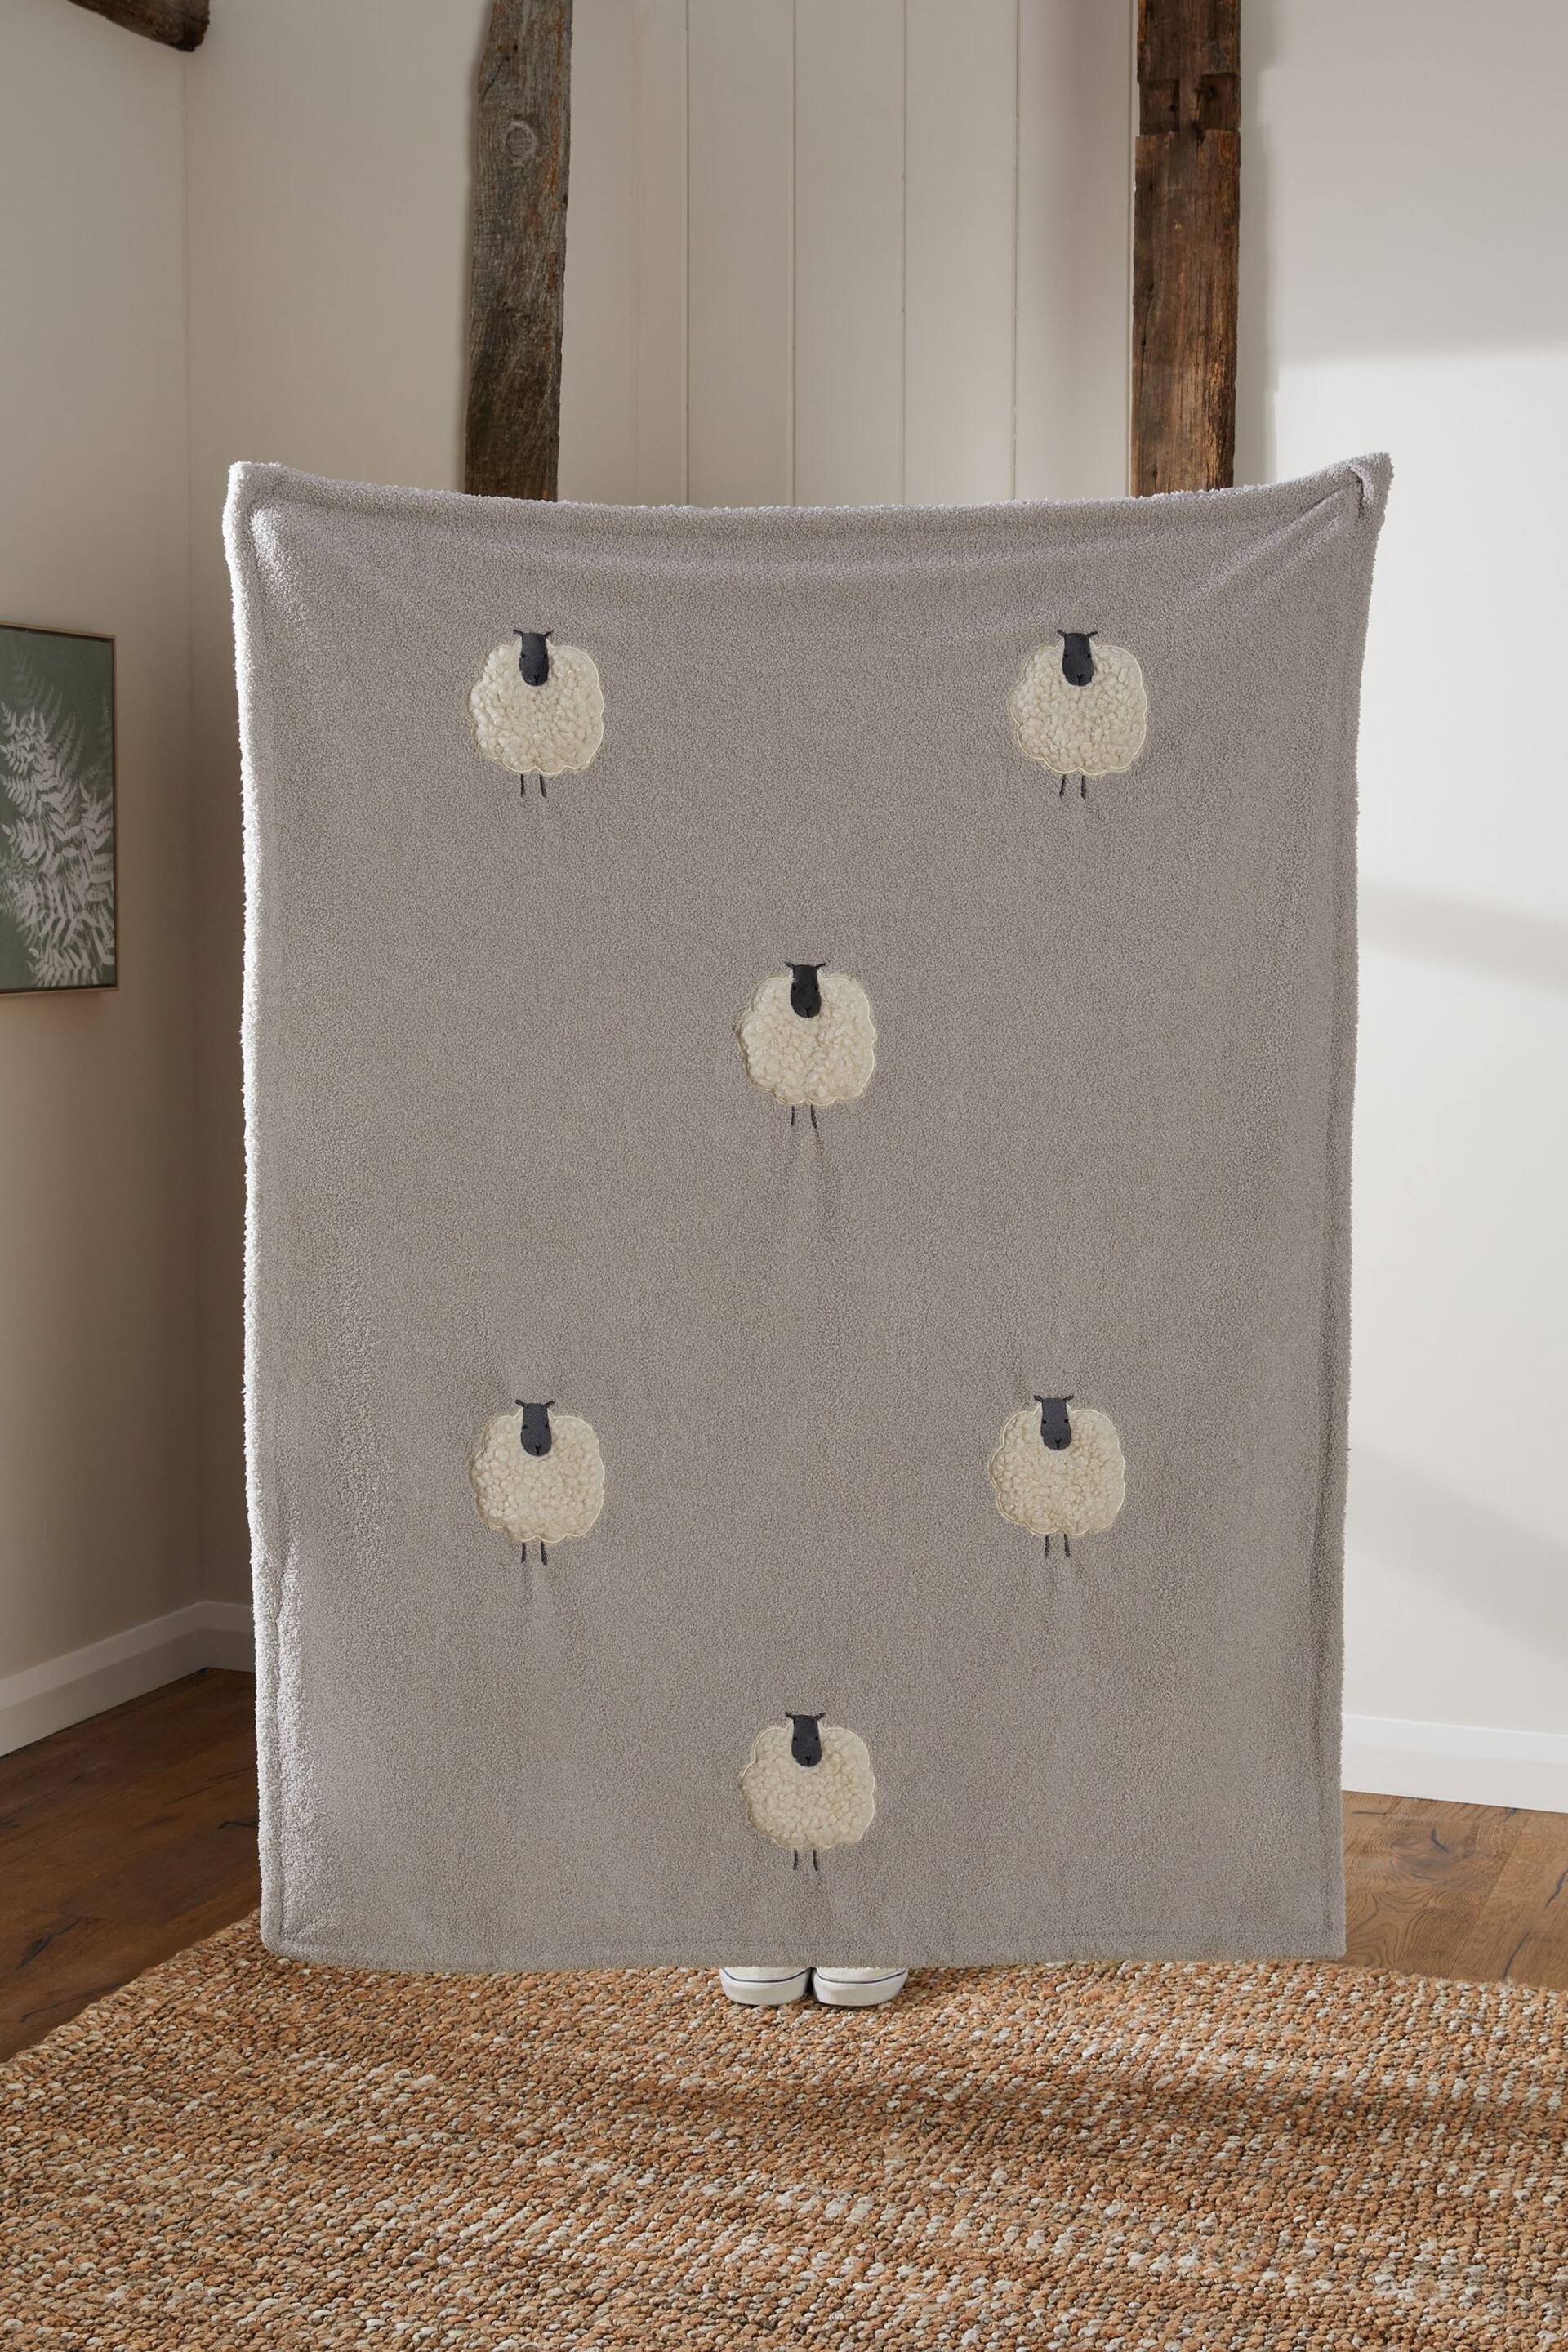 Grey Knitted Sheep Appliqué Throw - Image 2 of 5